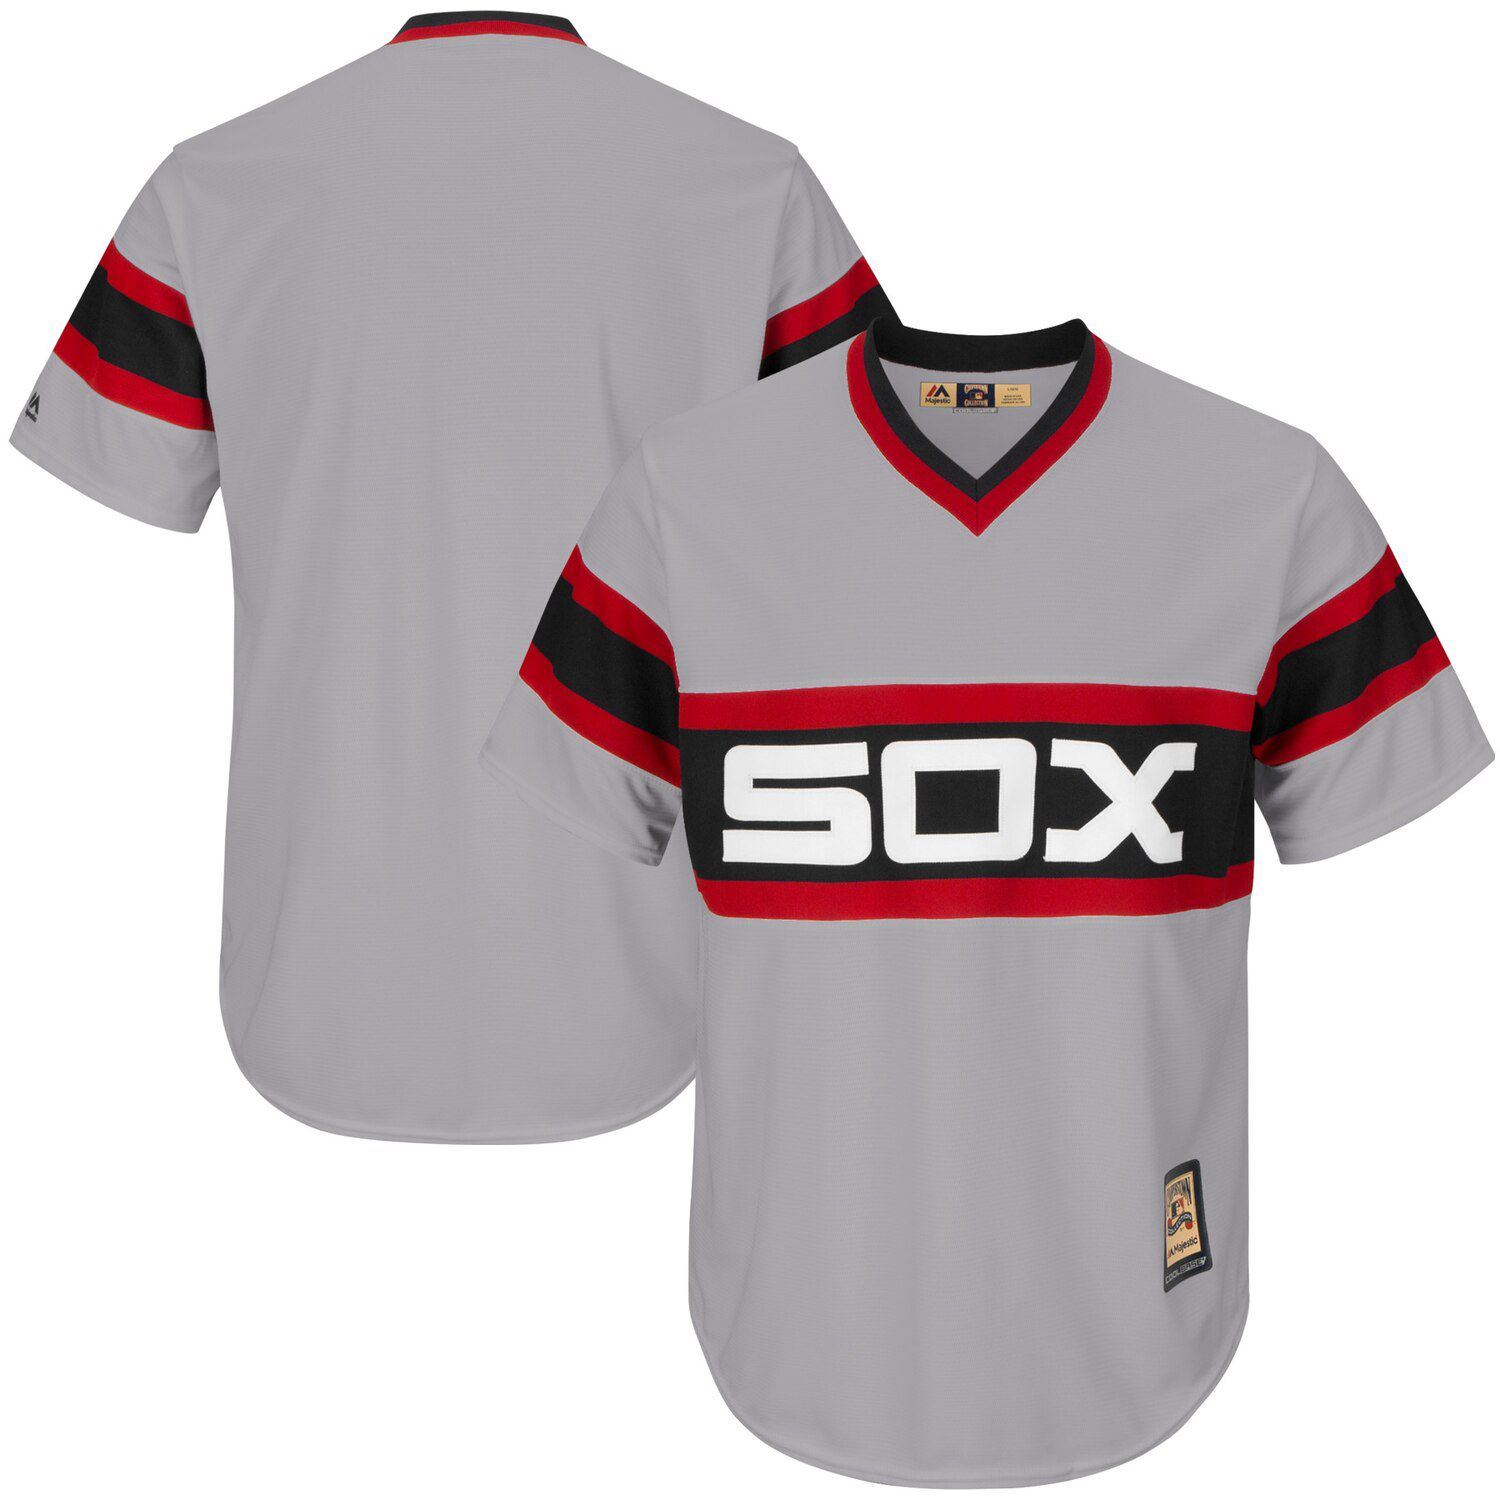 chicago white sox away jersey